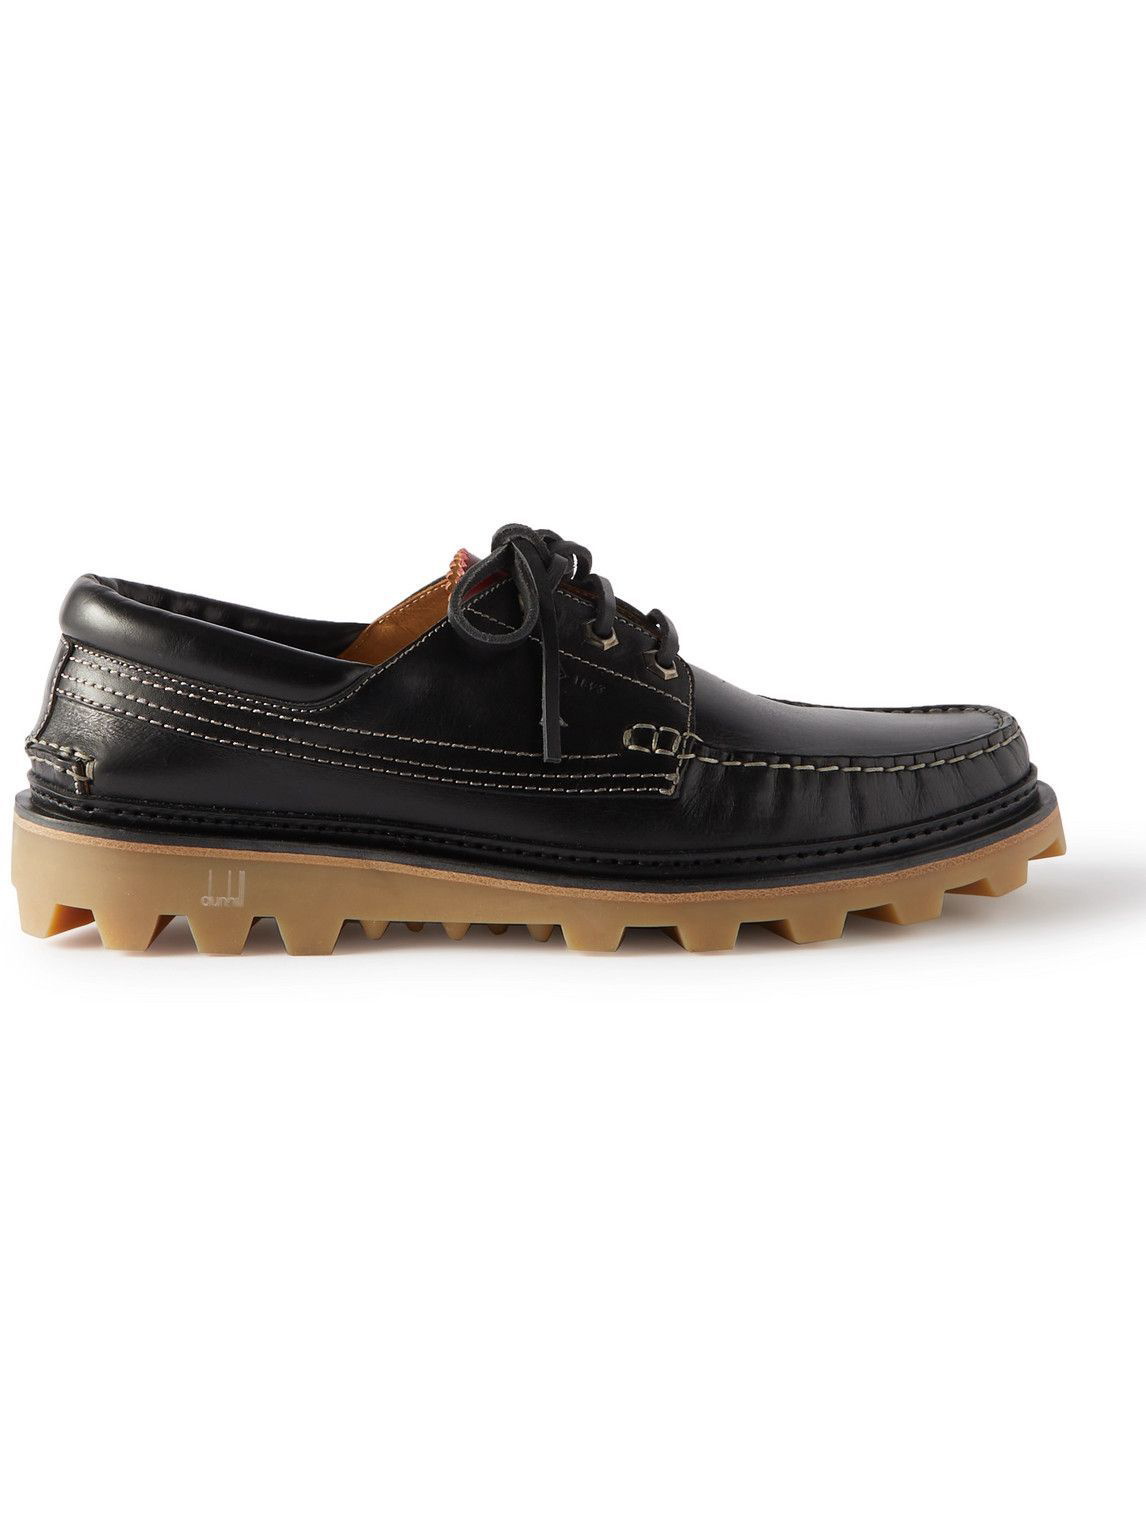 Dunhill - Leather Boat Shoes - Black Dunhill